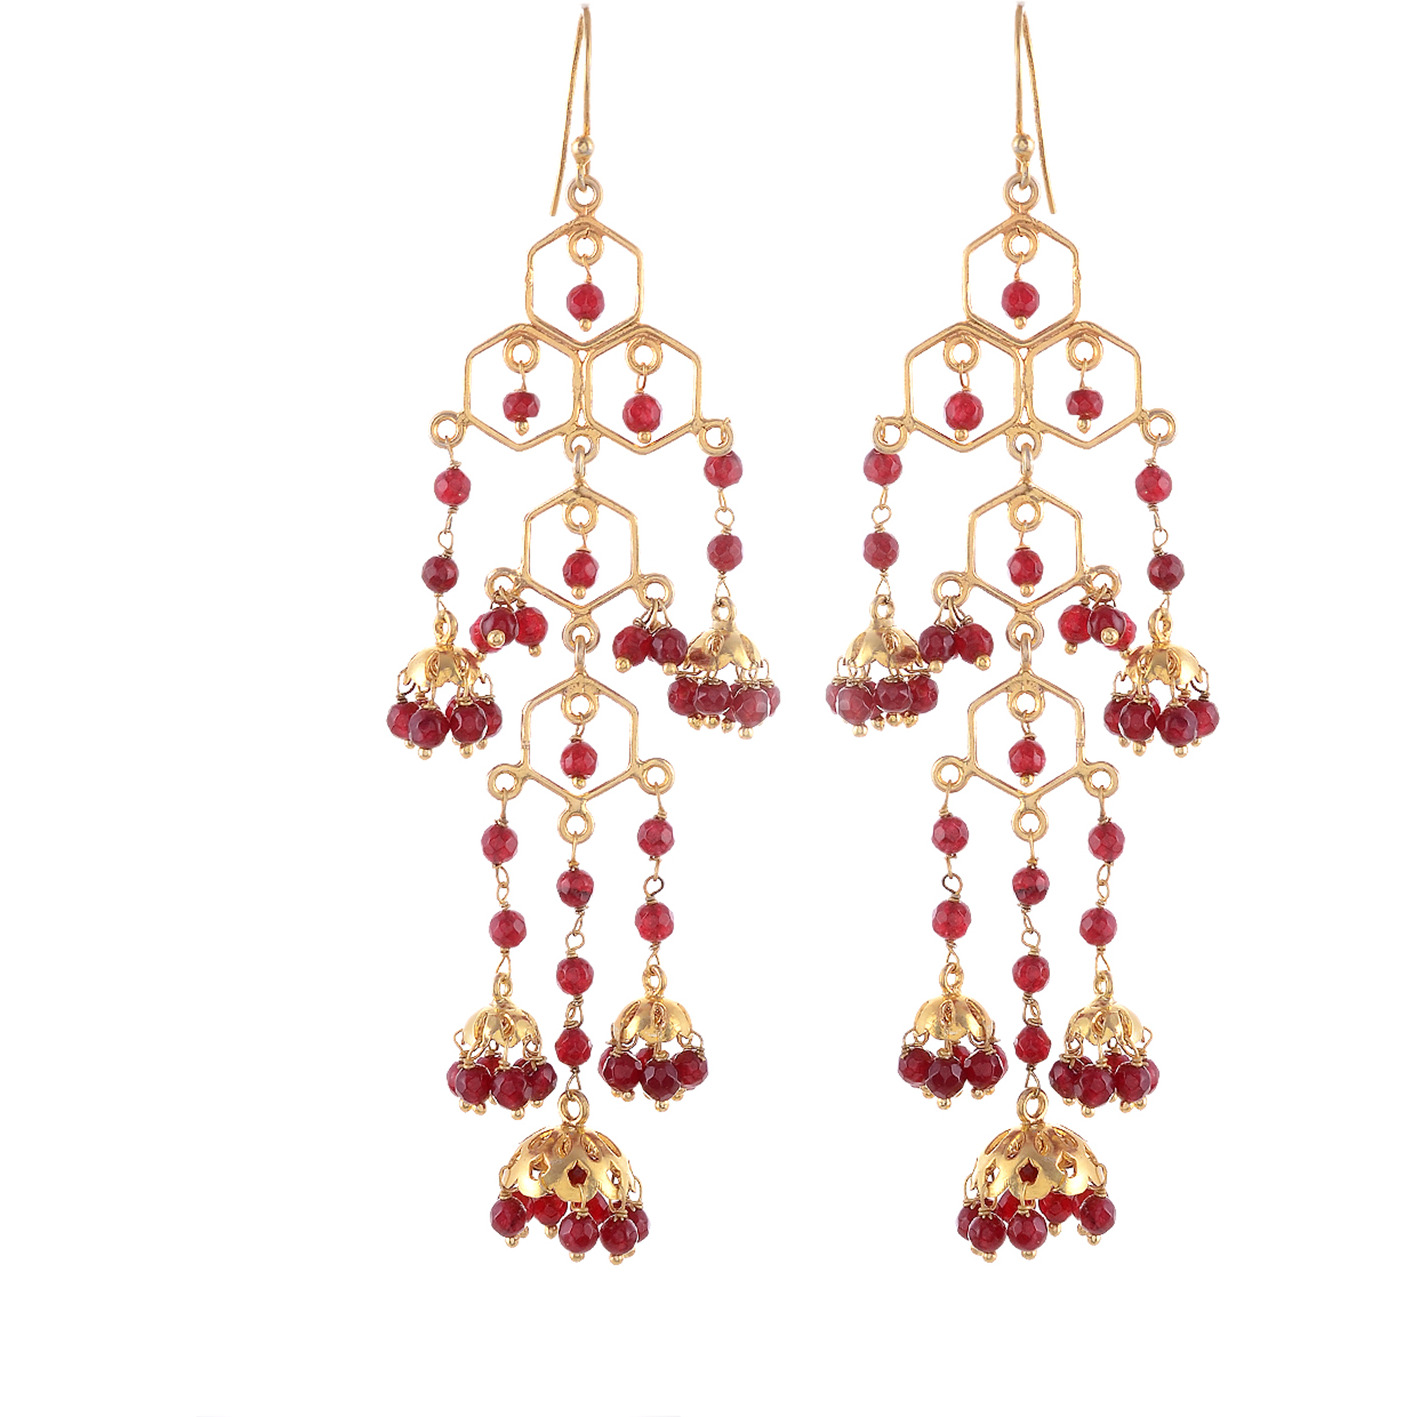 Gold Pated, Red Beads Beautiful Jhumka Earrings By Silvermerc Designs